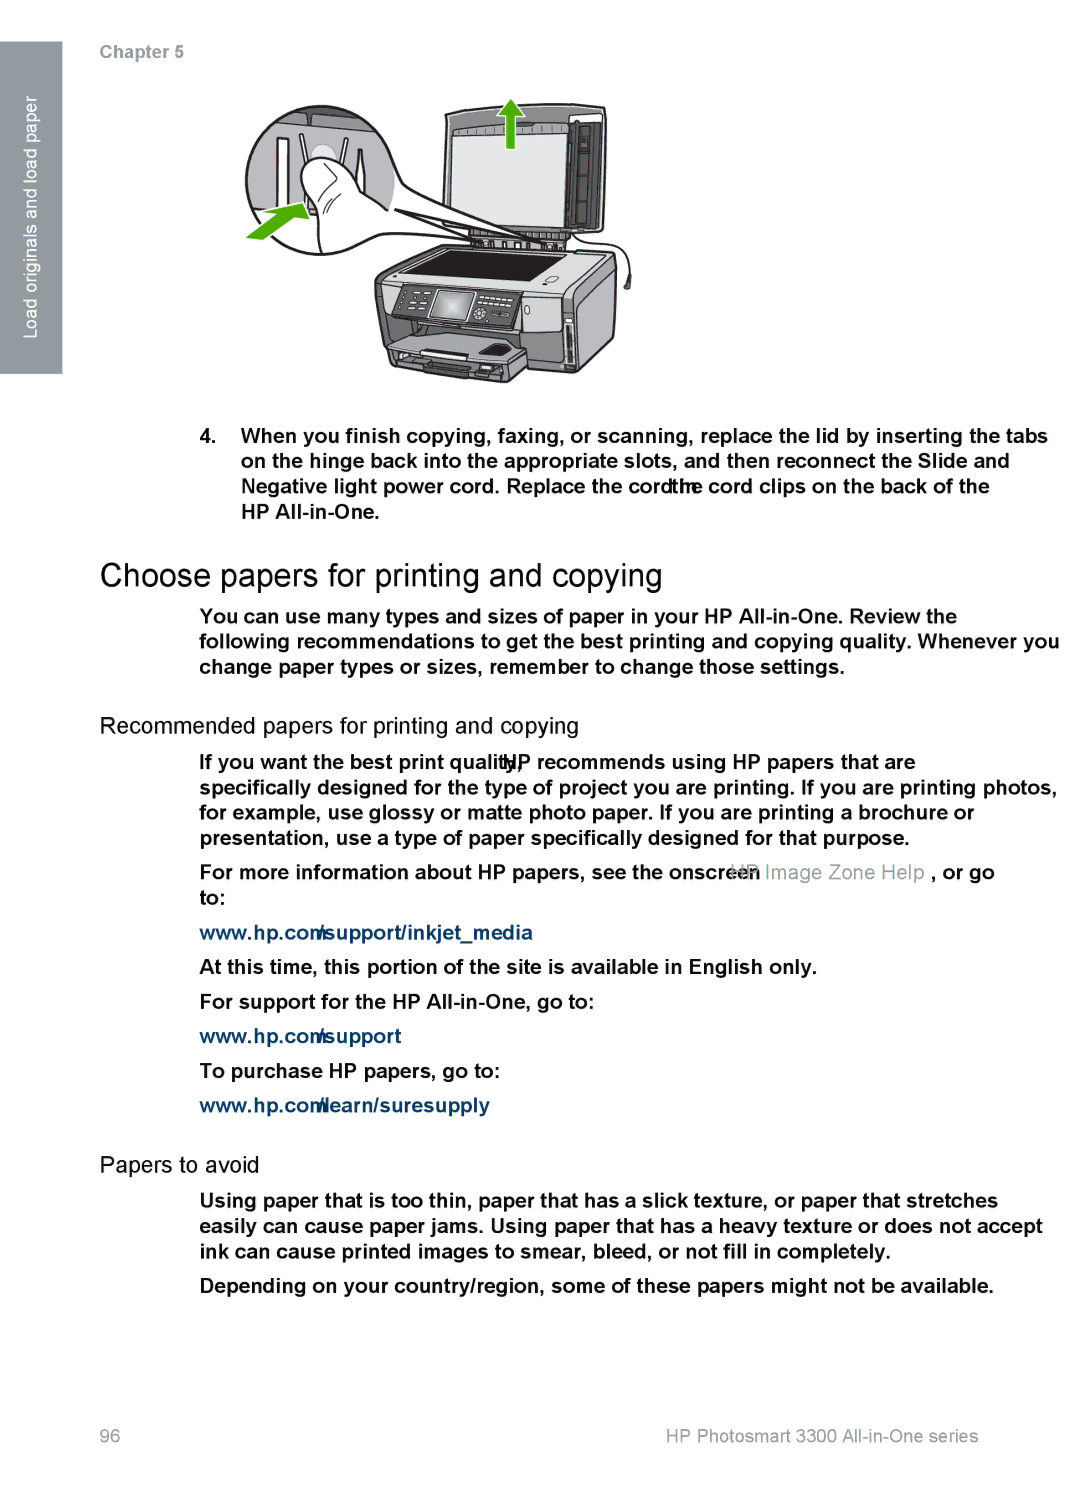 HP 3300 manual Choose papers for printing and copying, Recommended papers for printing and copying, Papers to avoid 